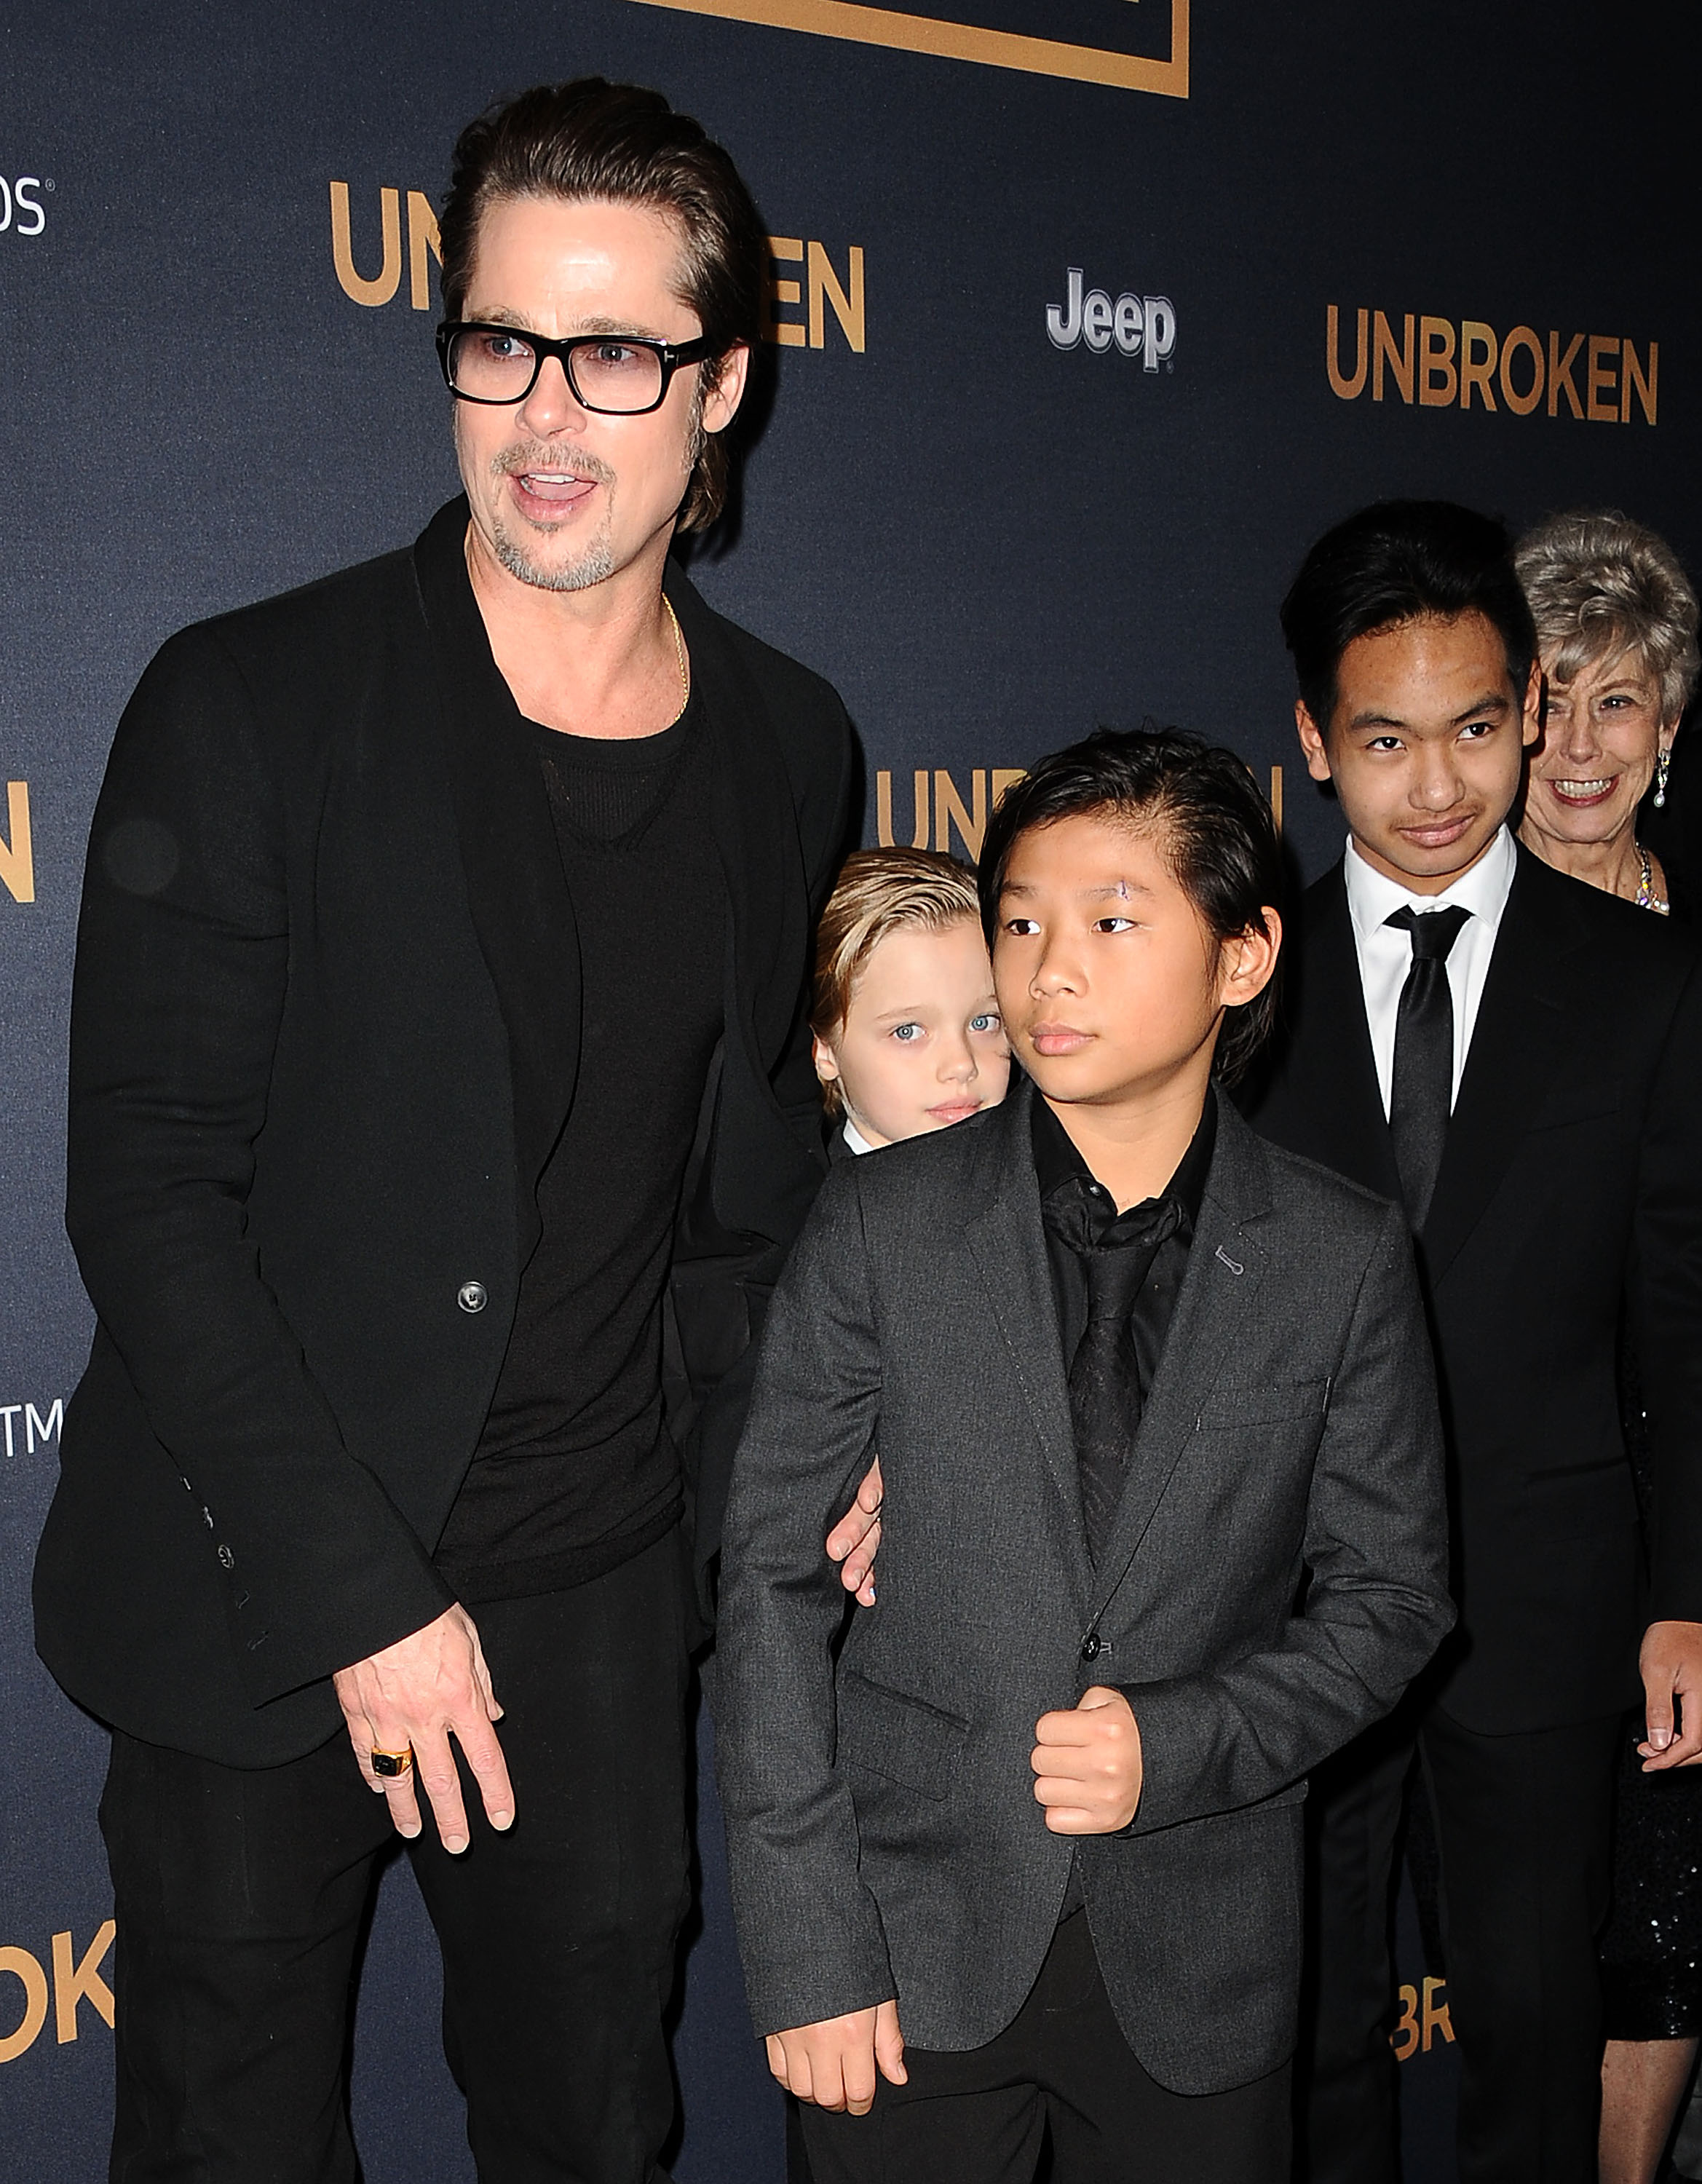 Brad Pitt, Shiloh Nouvel, Pax Thien, and Maddox Jolie-Pitt during the premiere of "Unbroken" in Hollywood, California on December 15, 2014 | Source: Getty Images